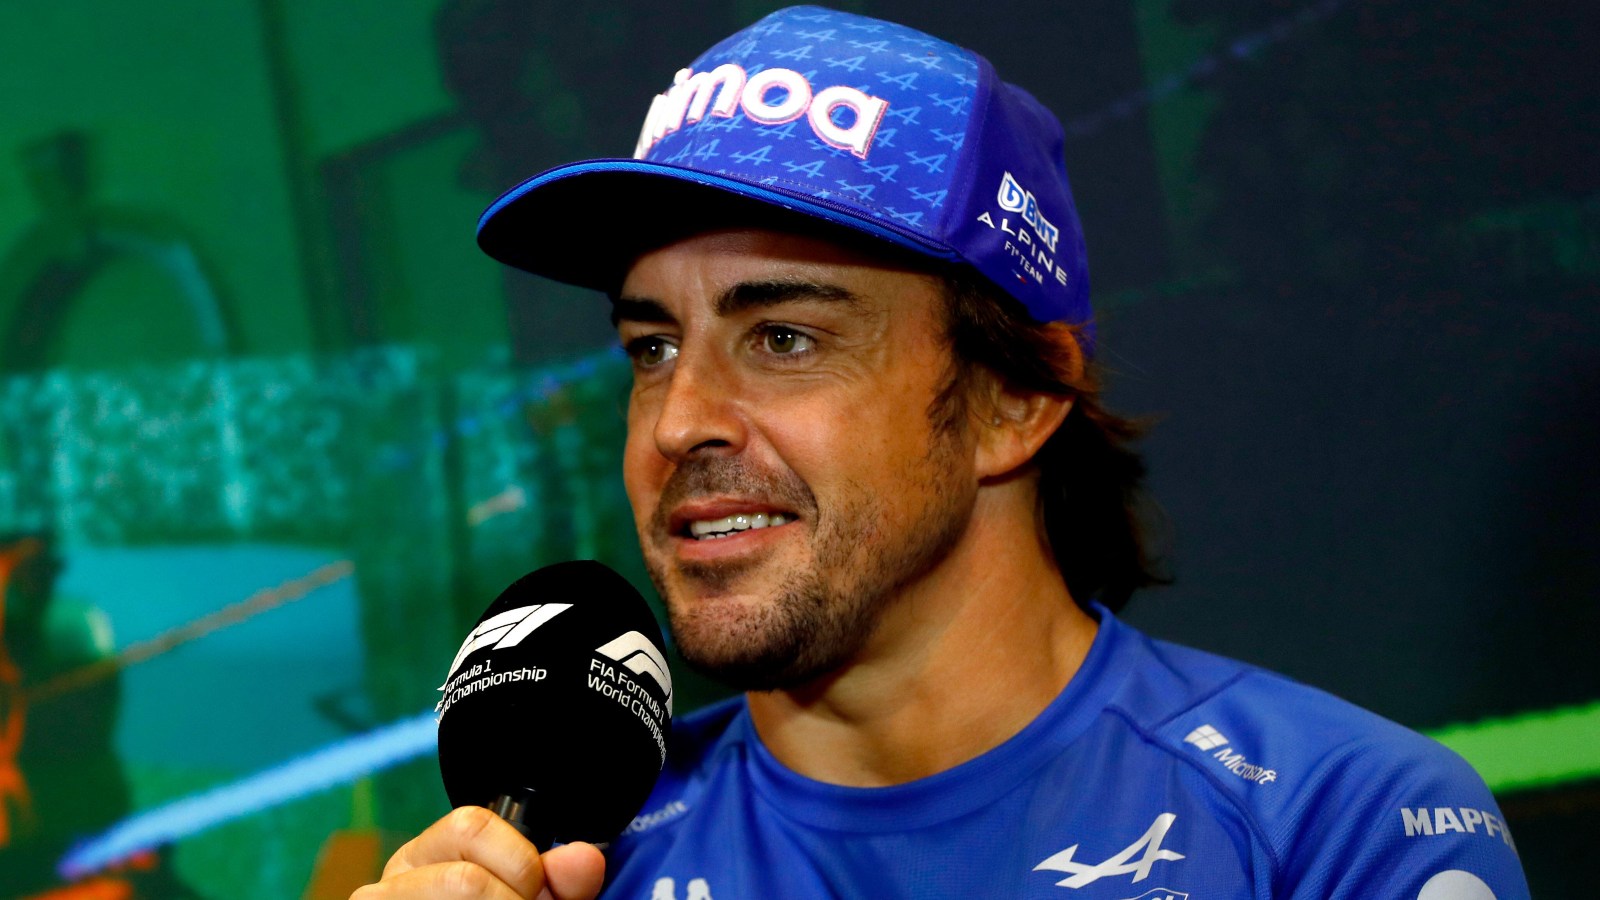 Fernando Alonso smiling whilst holding a microphone. Baku, June 2022.